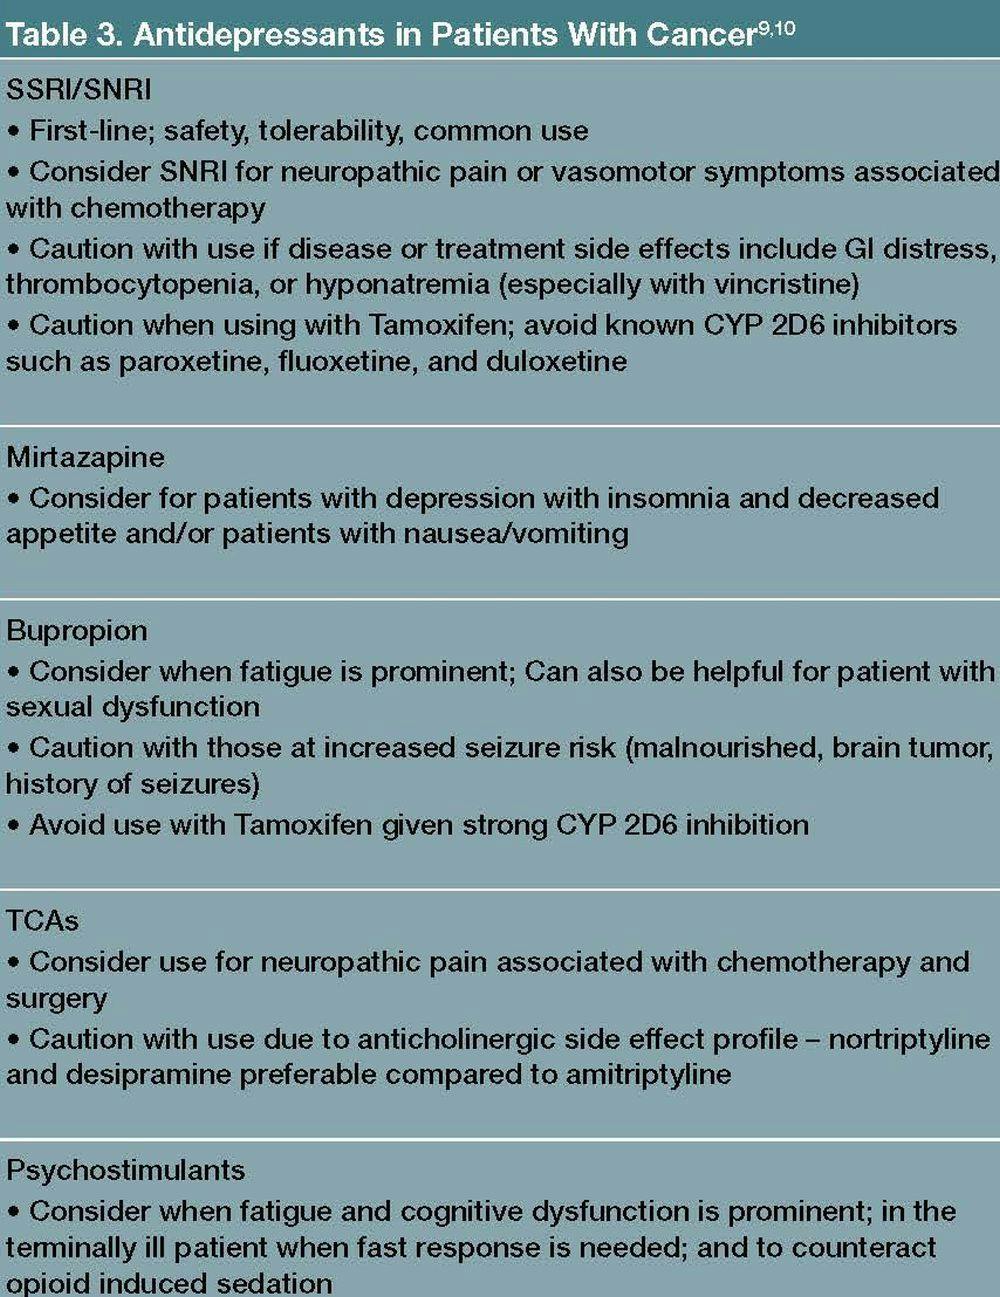 Antidepressants in Patients With Cancer